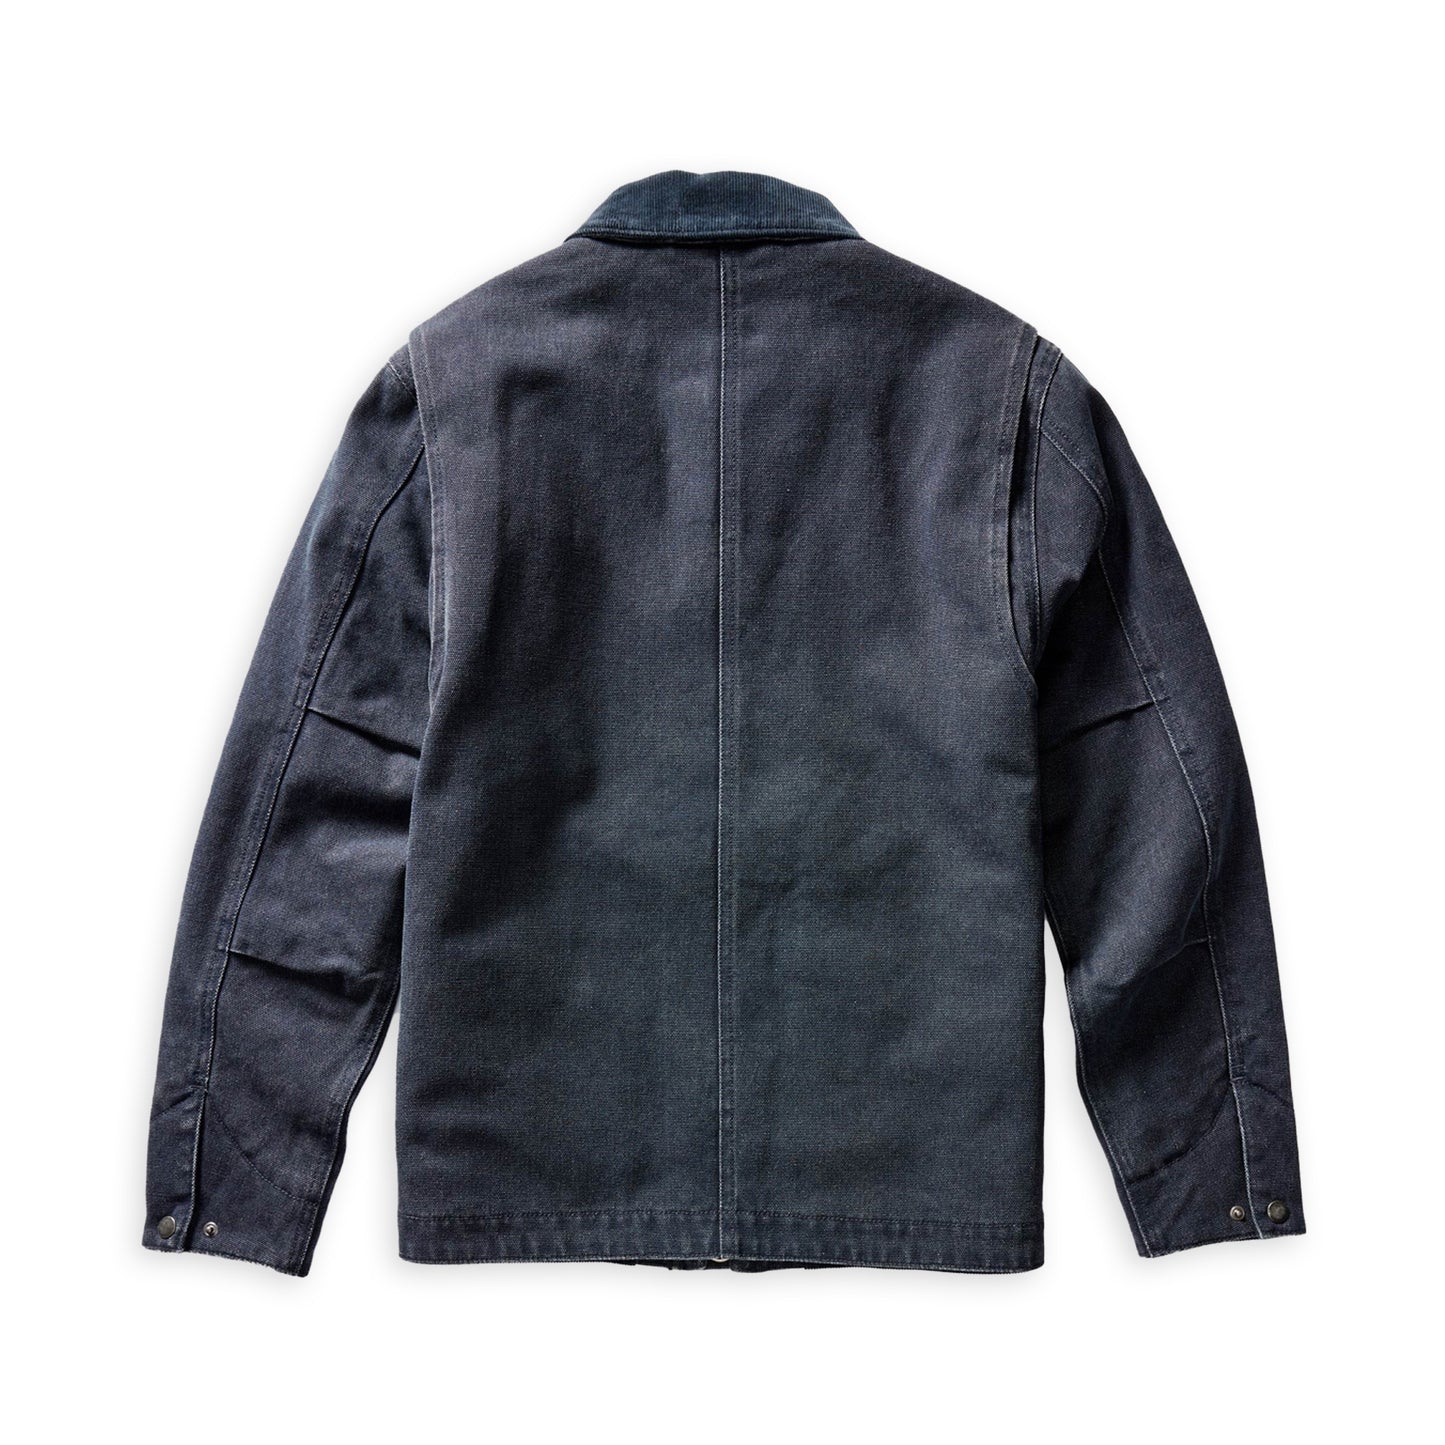 Taylor Stitch Chipped Canvas Workhorse Jacket | Uncrate Supply